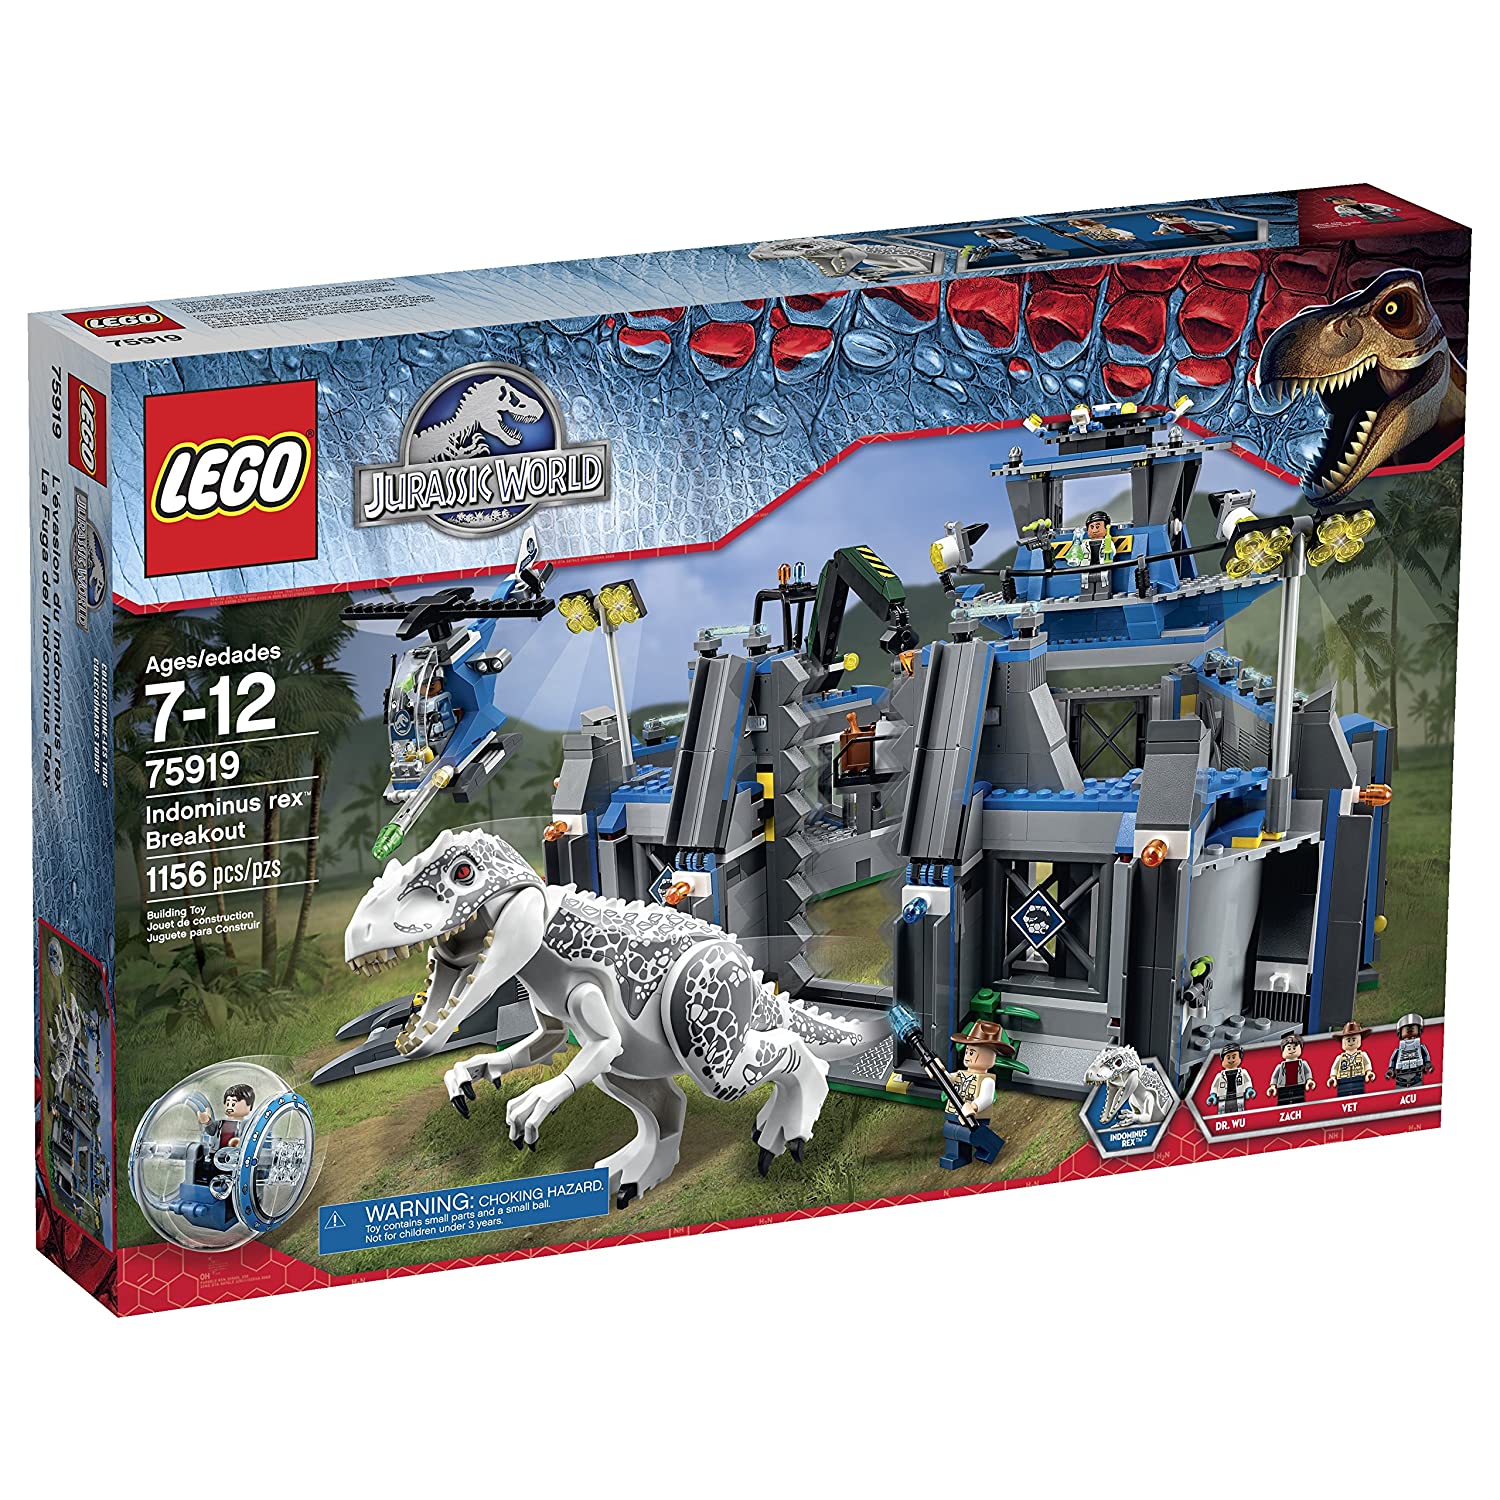 Top 9 Best Lego Jurassic Park Sets Reviews in 2022 3